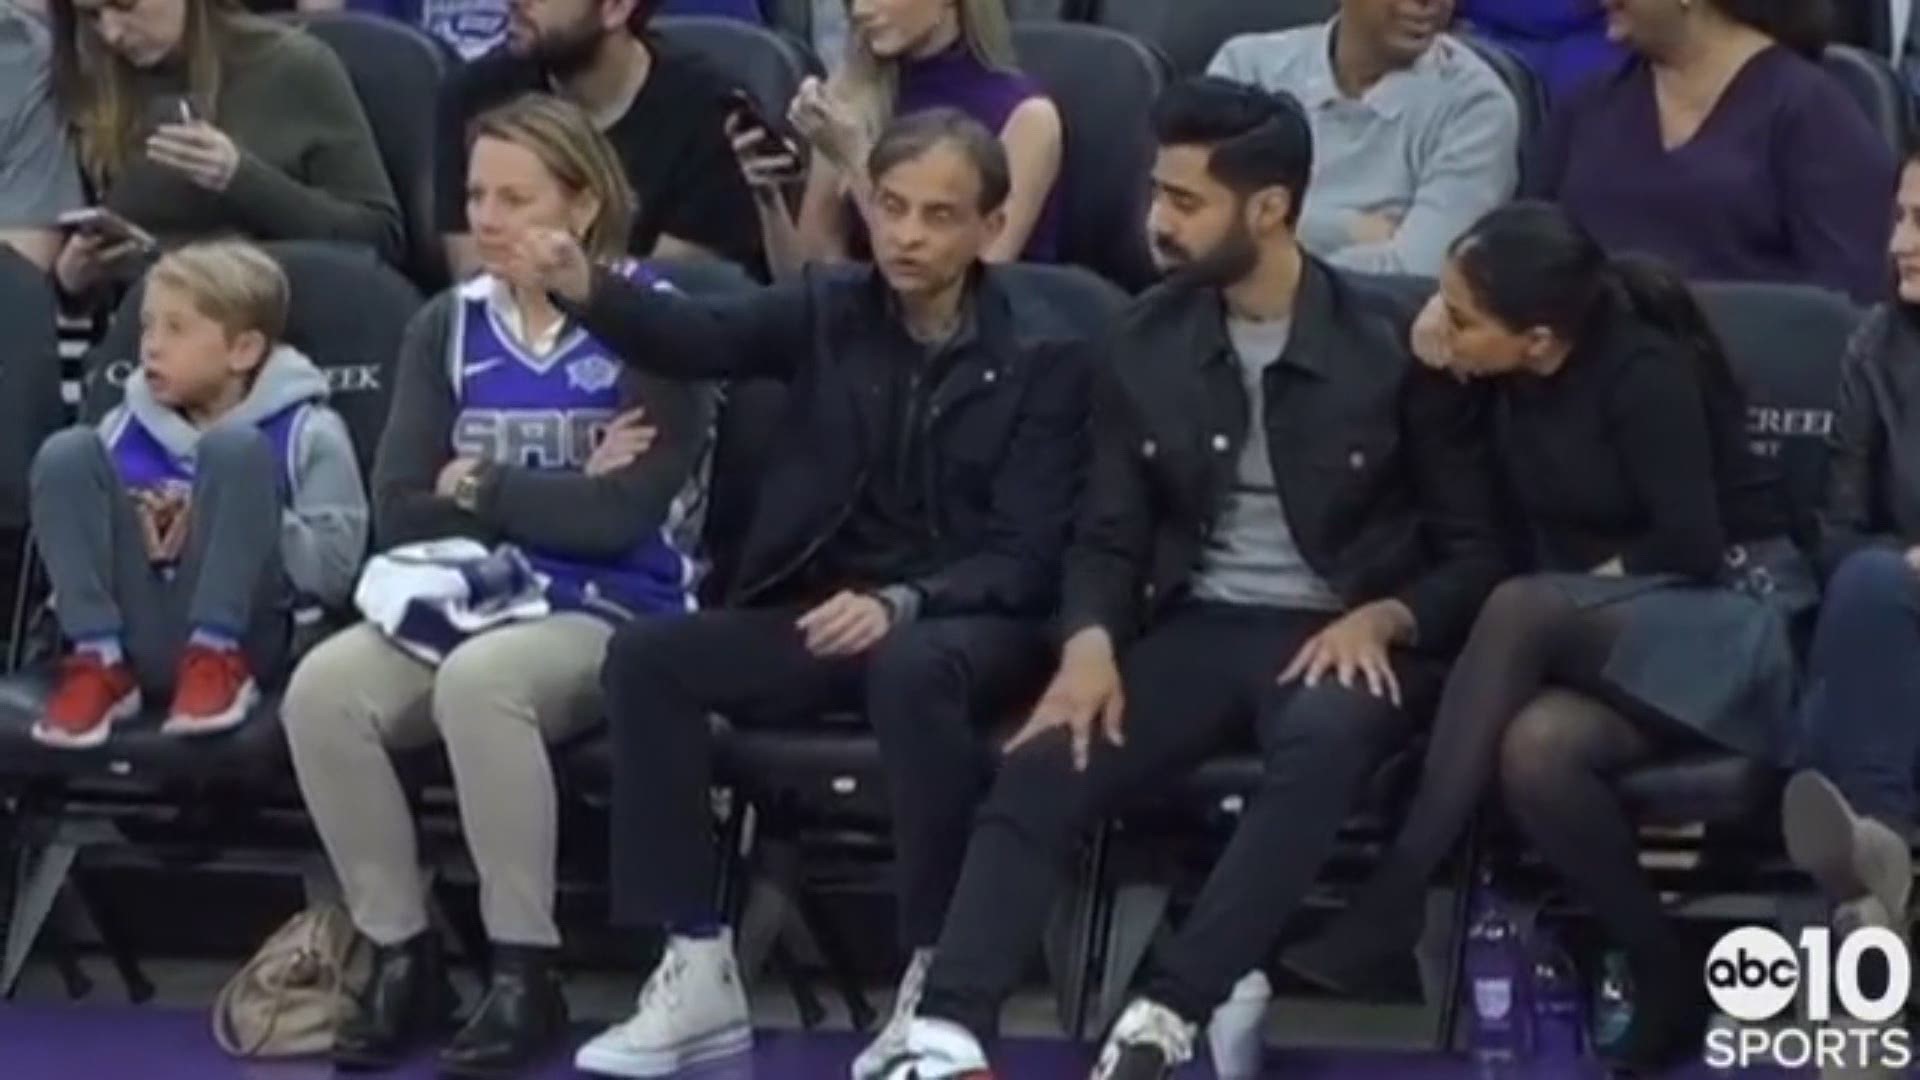 Comedian Hasan Minhaj, who grew up in Davis as a die-hard fan of the Sacramento Kings, talks to ABC10's Sean Cunningham about attending Saturday night's game, sitting courtside with owner Vivek Ranadive and his love for the team, as well as hatred for the Lakers.